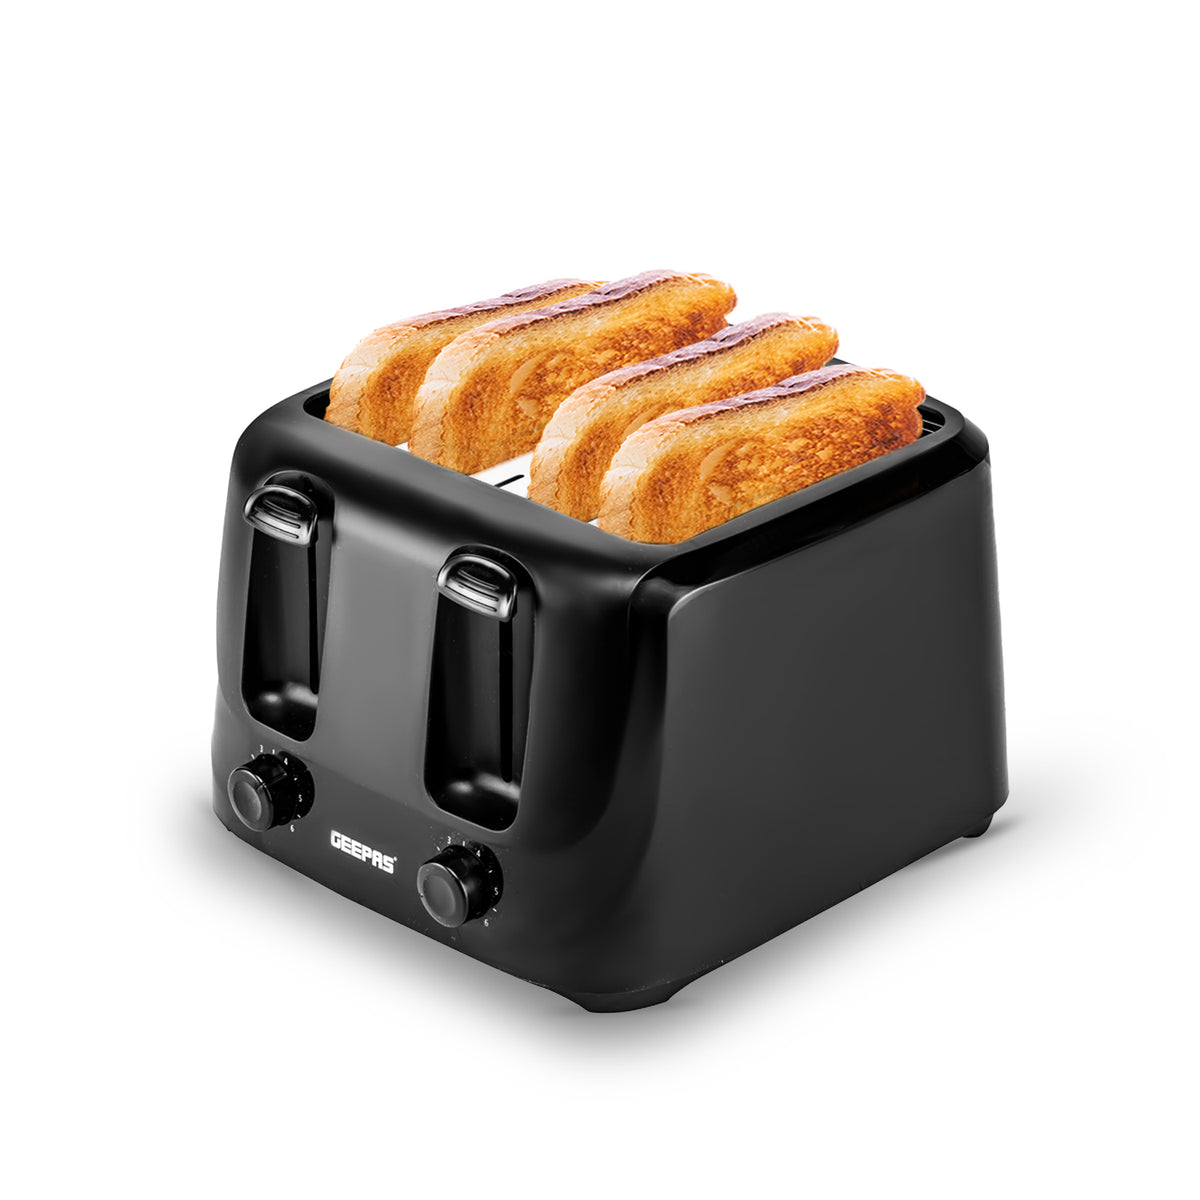 Four-Slice Black Bread Toaster With Browning Control